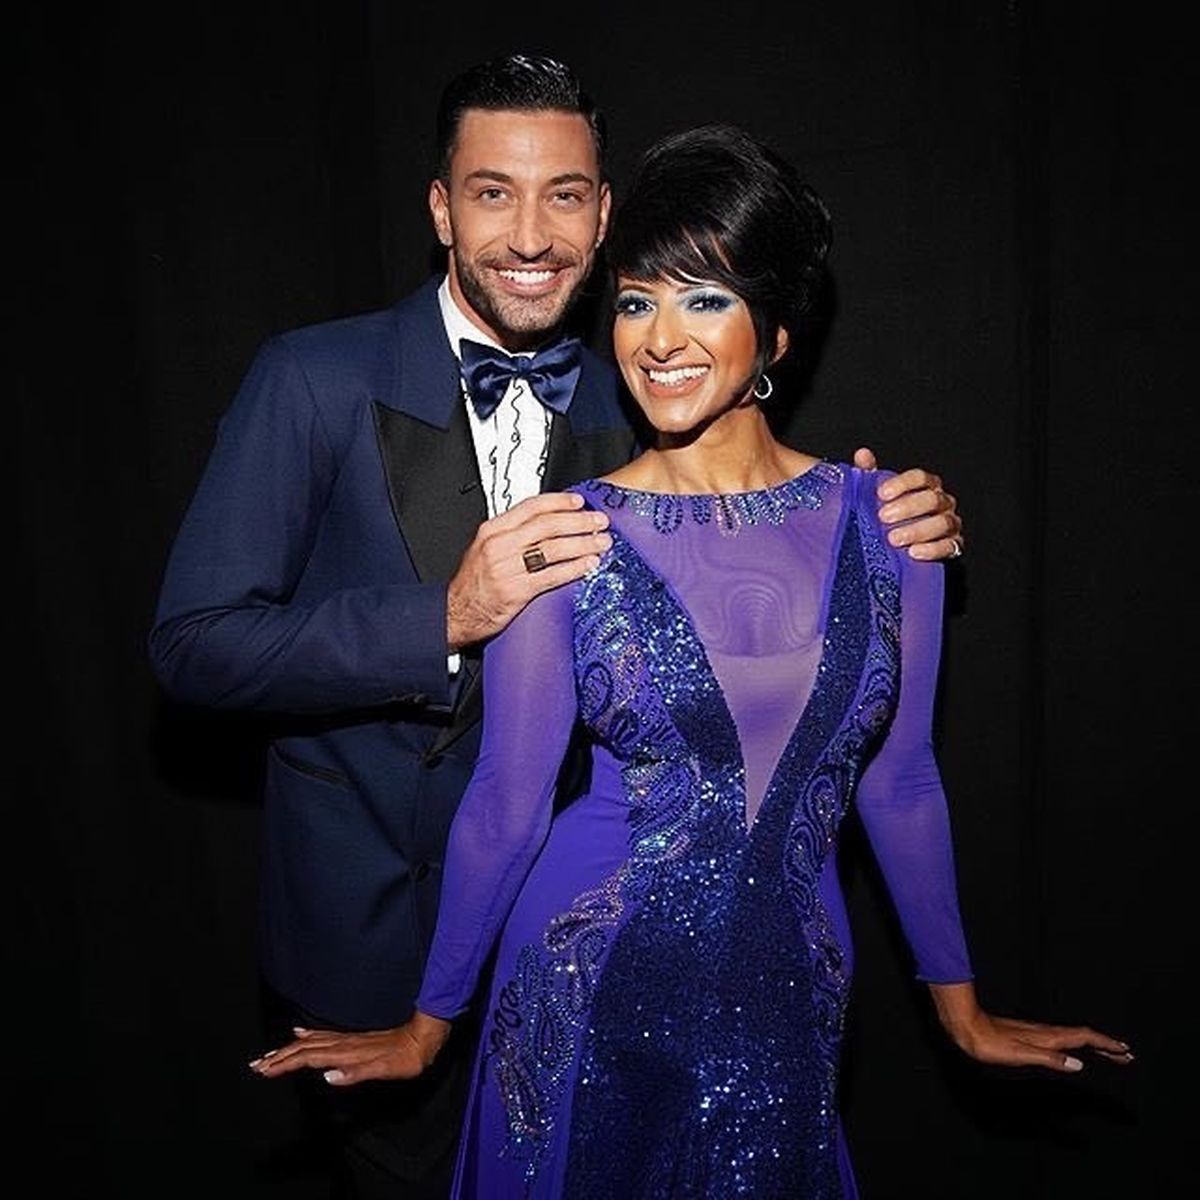 Ranvir Singh and her dance partner Giovanni, Who is Ranvir Singh husband Ranjeet Singh Dehal, pictures, facts, career - www.sidomexentertainment.com